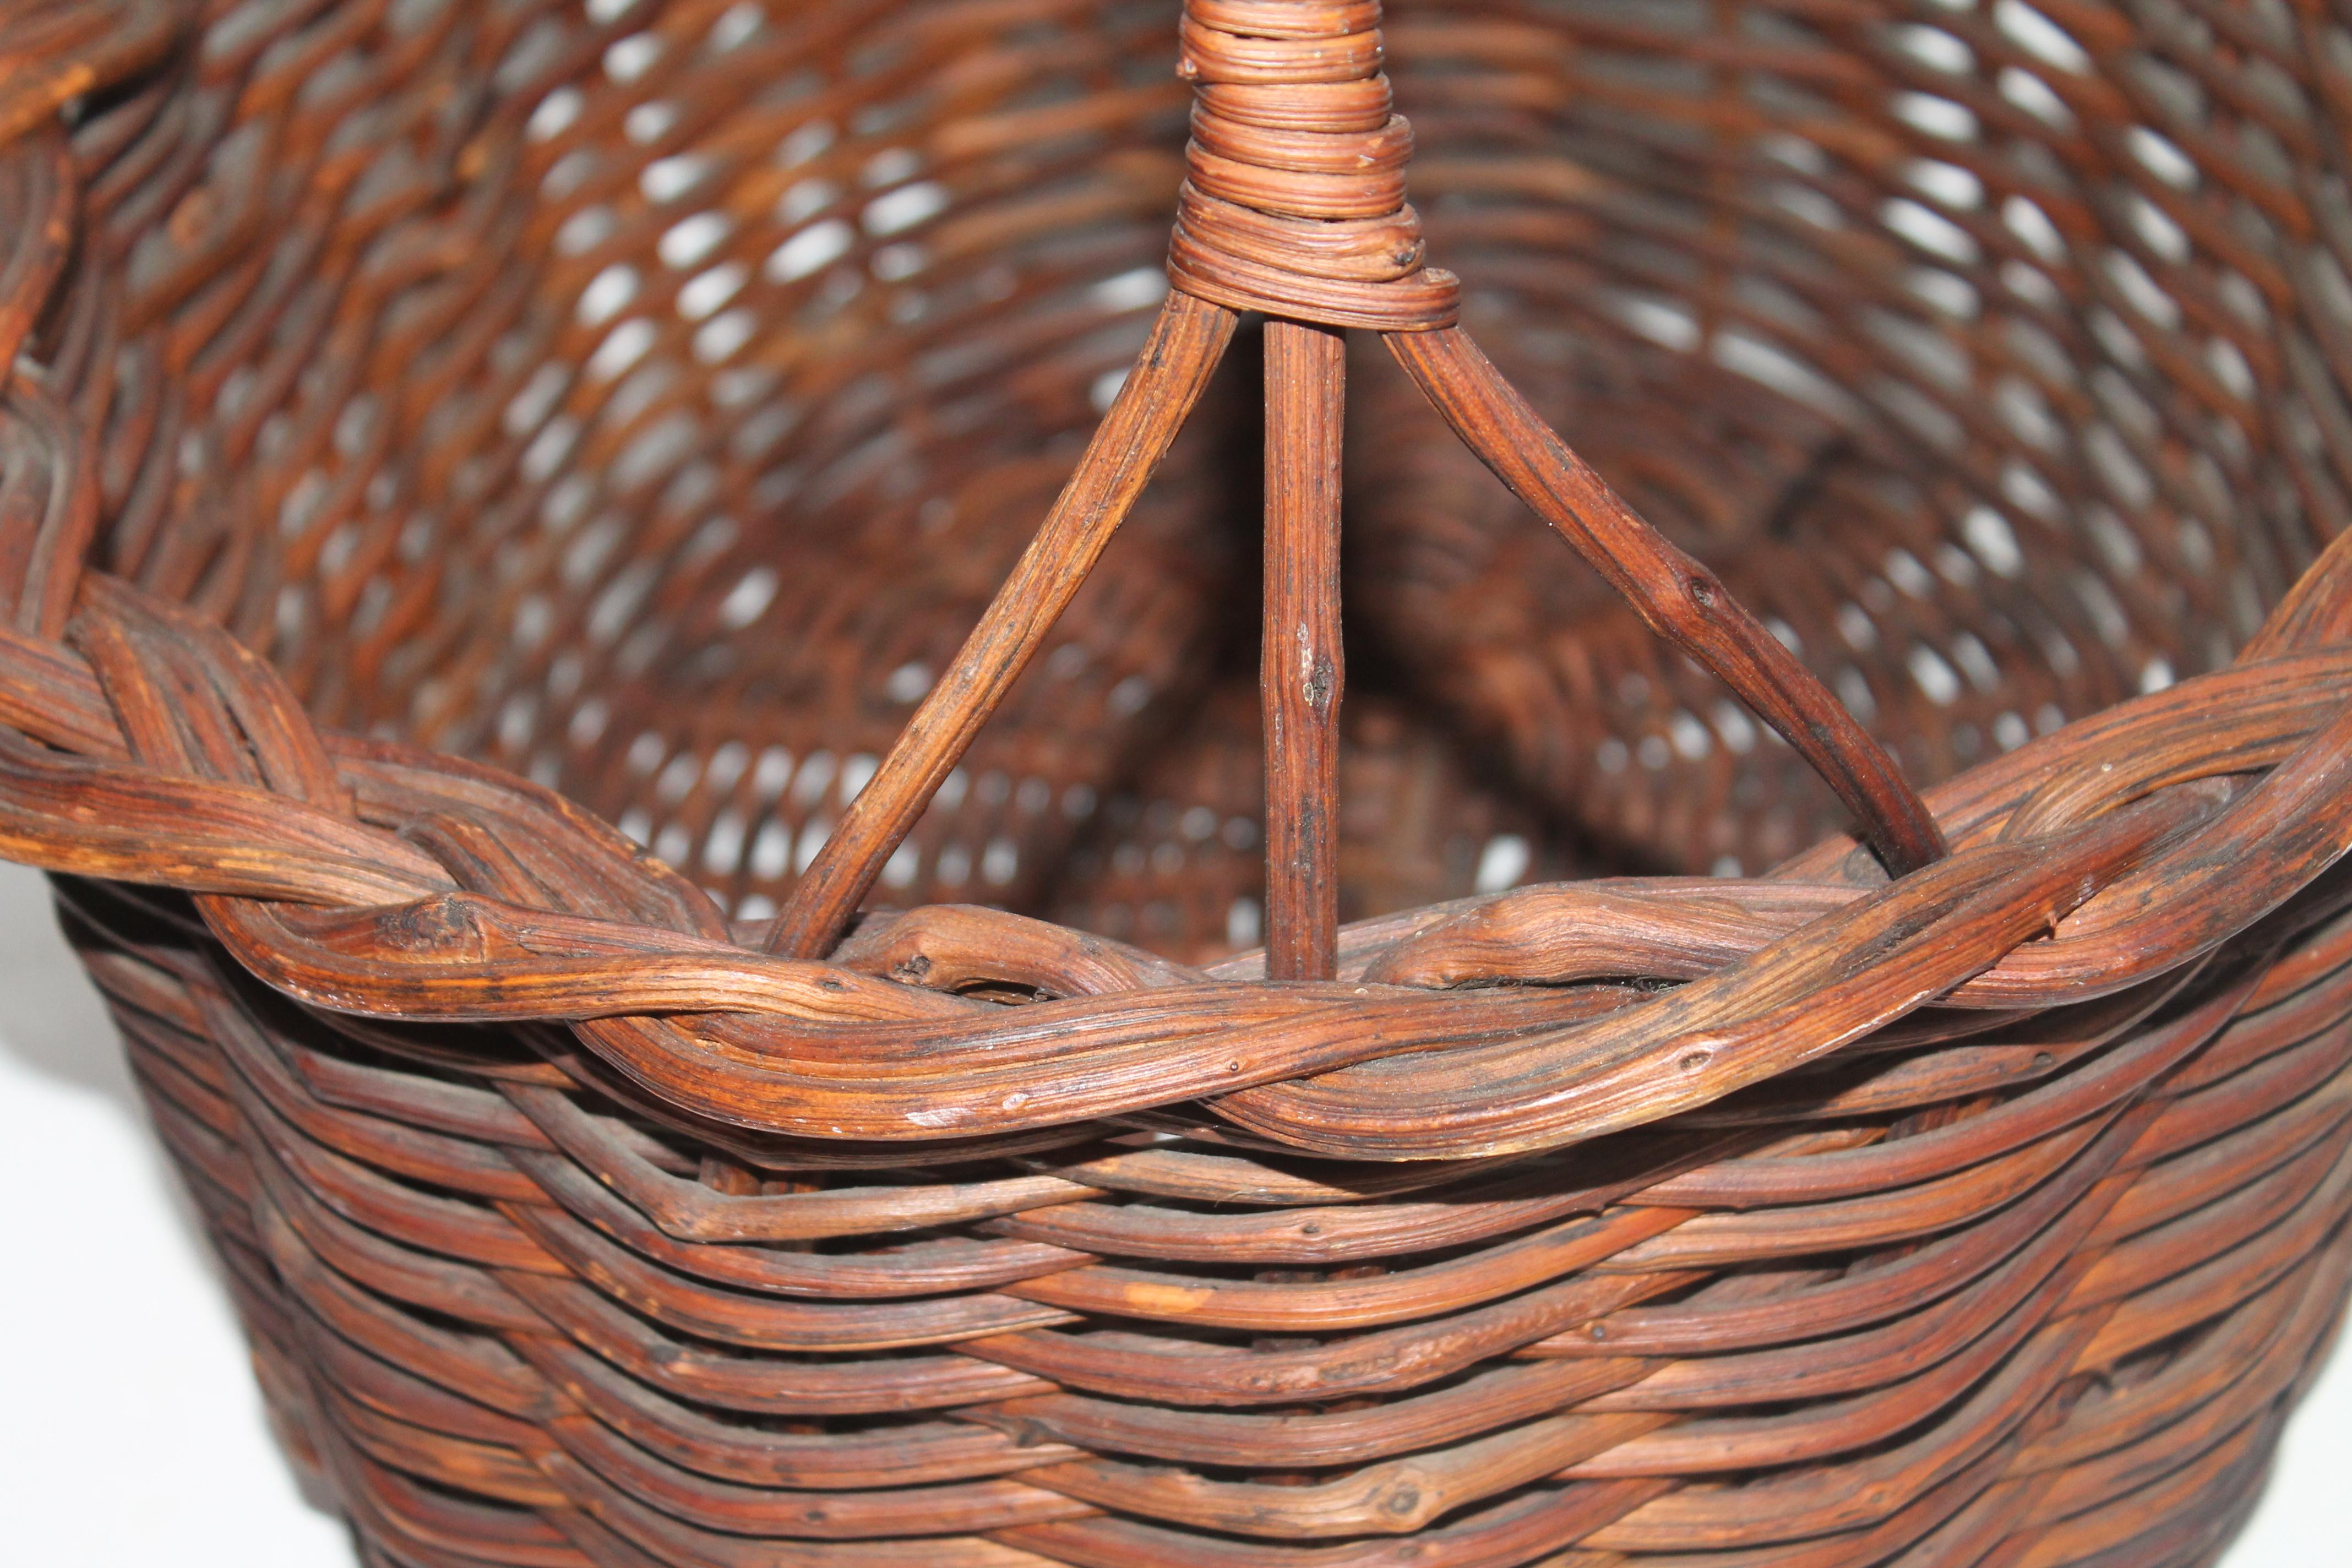 Hand-Woven 19th Century Basket with Handle from Pennsylvania